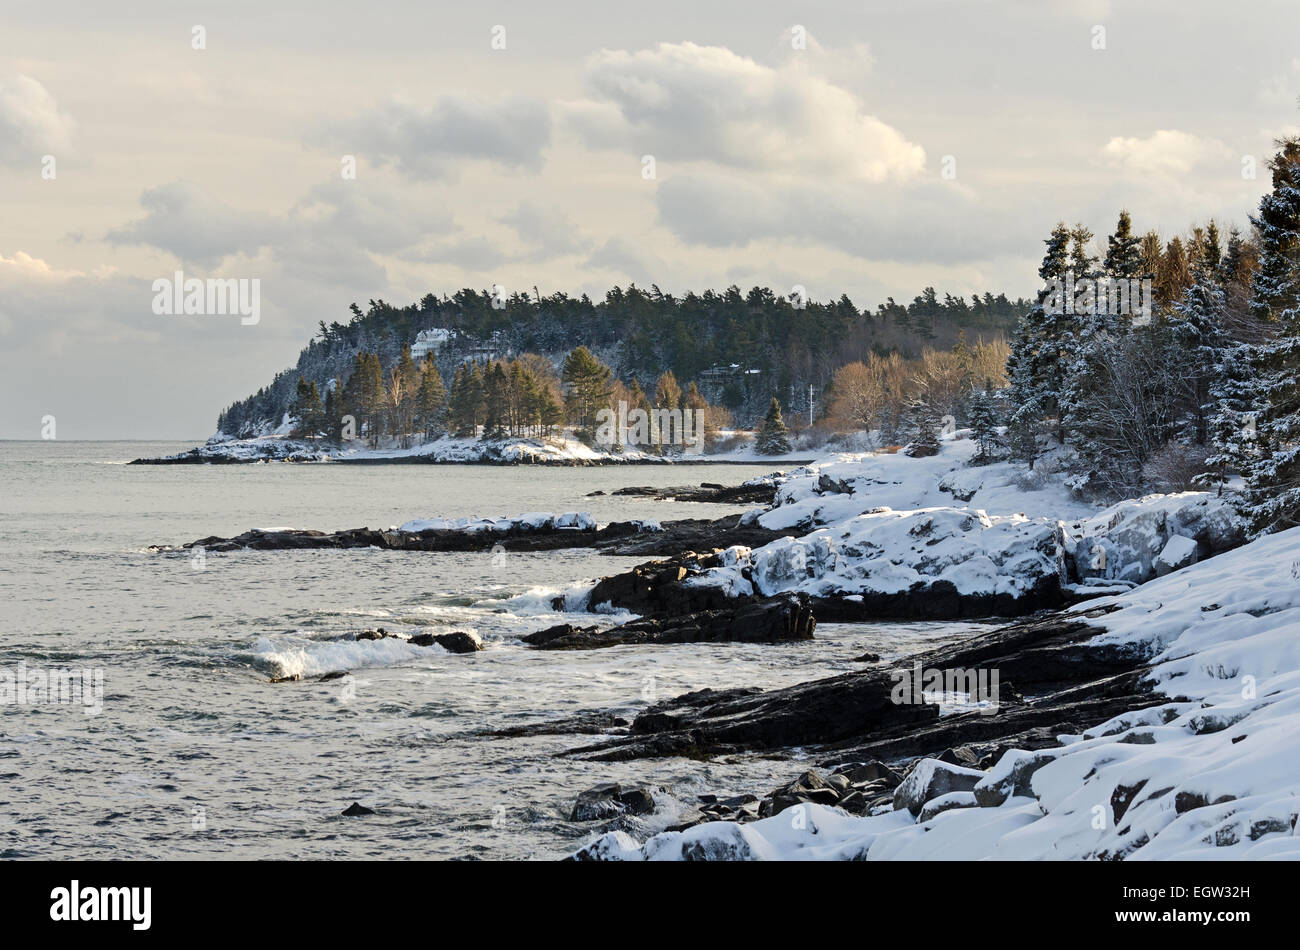 Snow covers the rocky shores of Bar Harbor, Maine on a bitterly cold winter day. Stock Photo